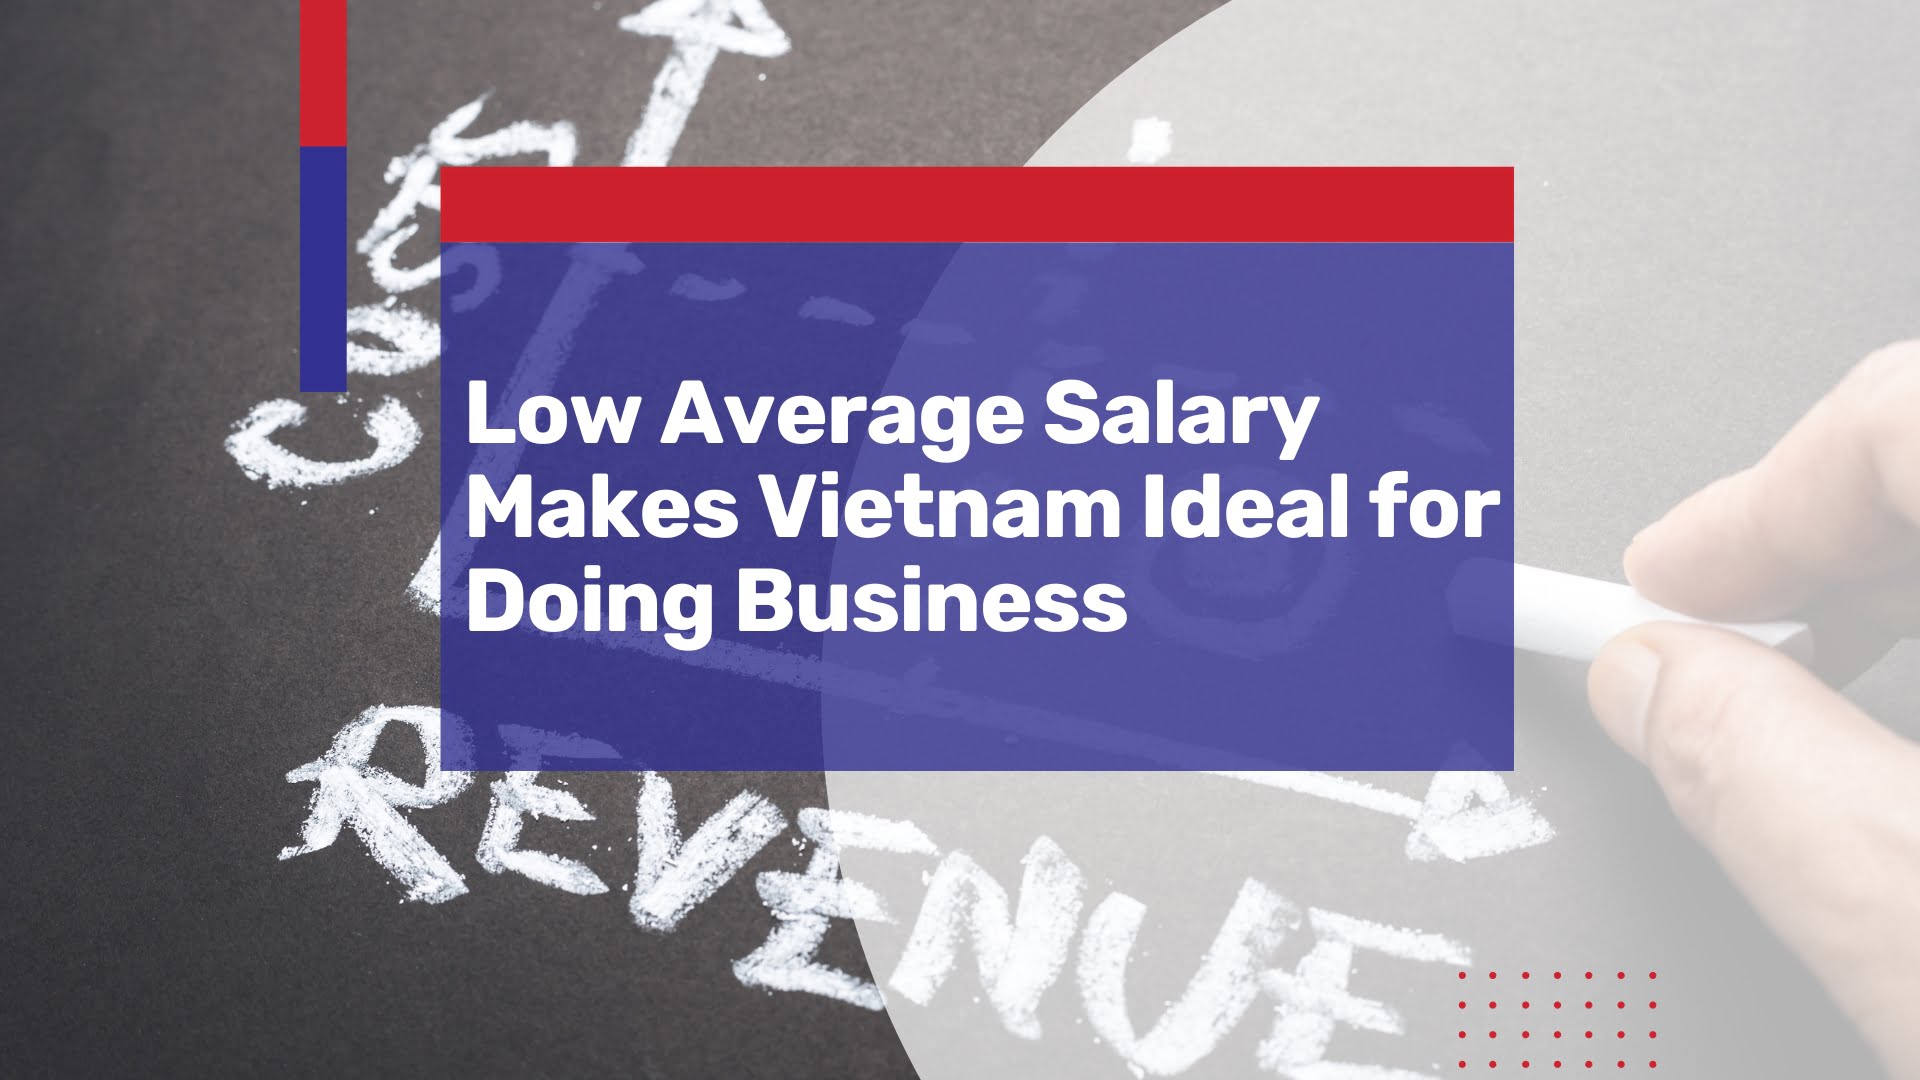 Low Average Salary Makes Vietnam One of the Most Affordable Countries for Doing Business